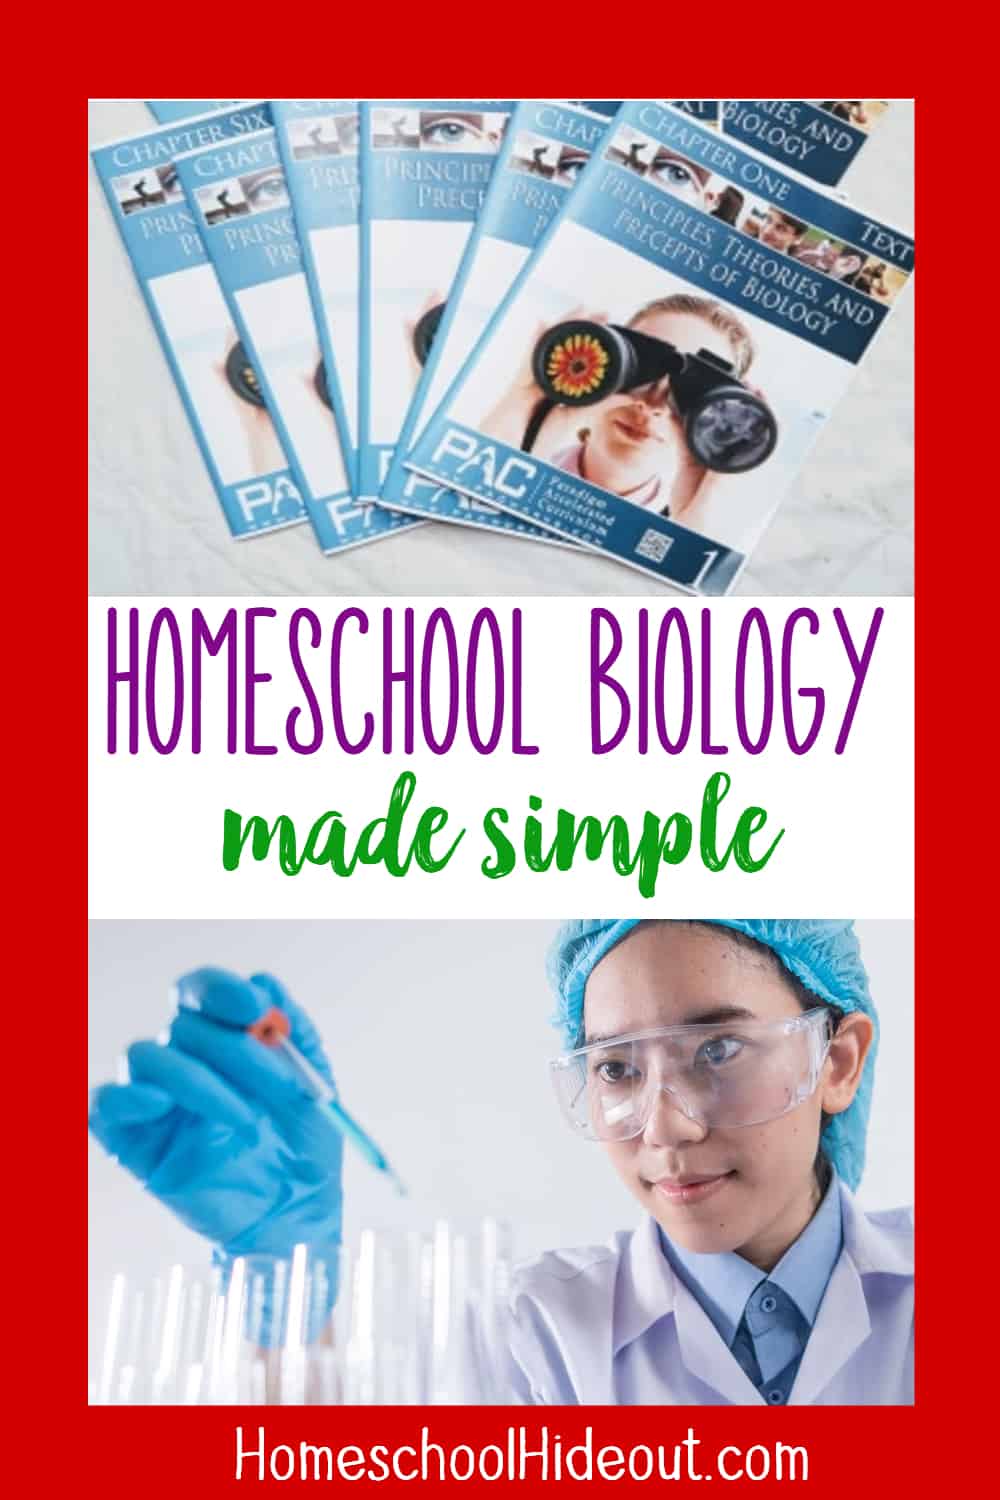 Wondering how to homeschool biology? PAC does all the work for you! And, kids LOVE it. #homeschool #science #biology